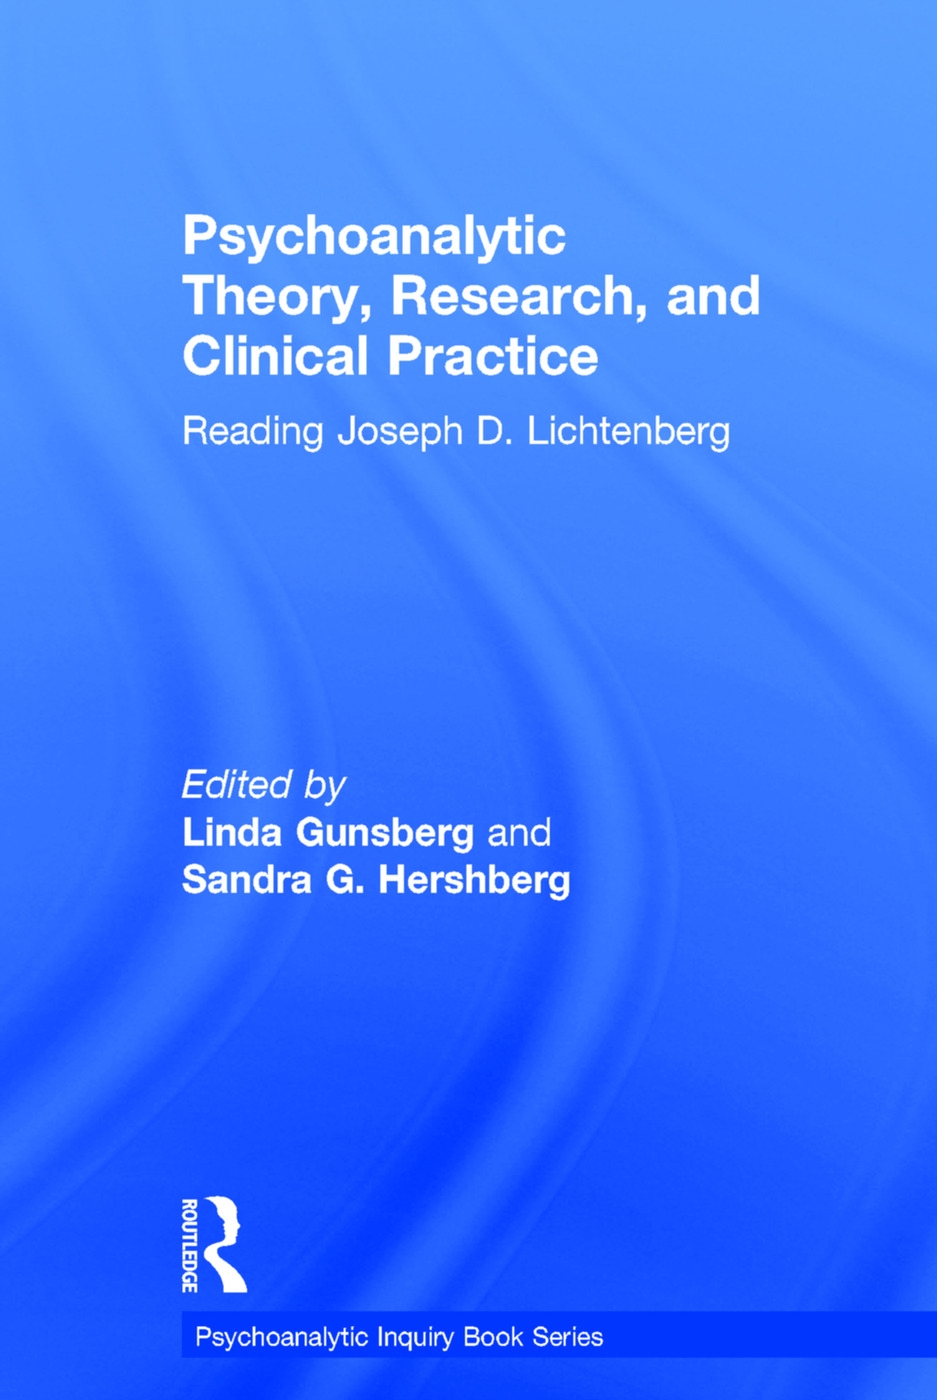 Psychoanalytic Theory, Research, and Clinical Practice: Reading Joseph D. Lichtenberg